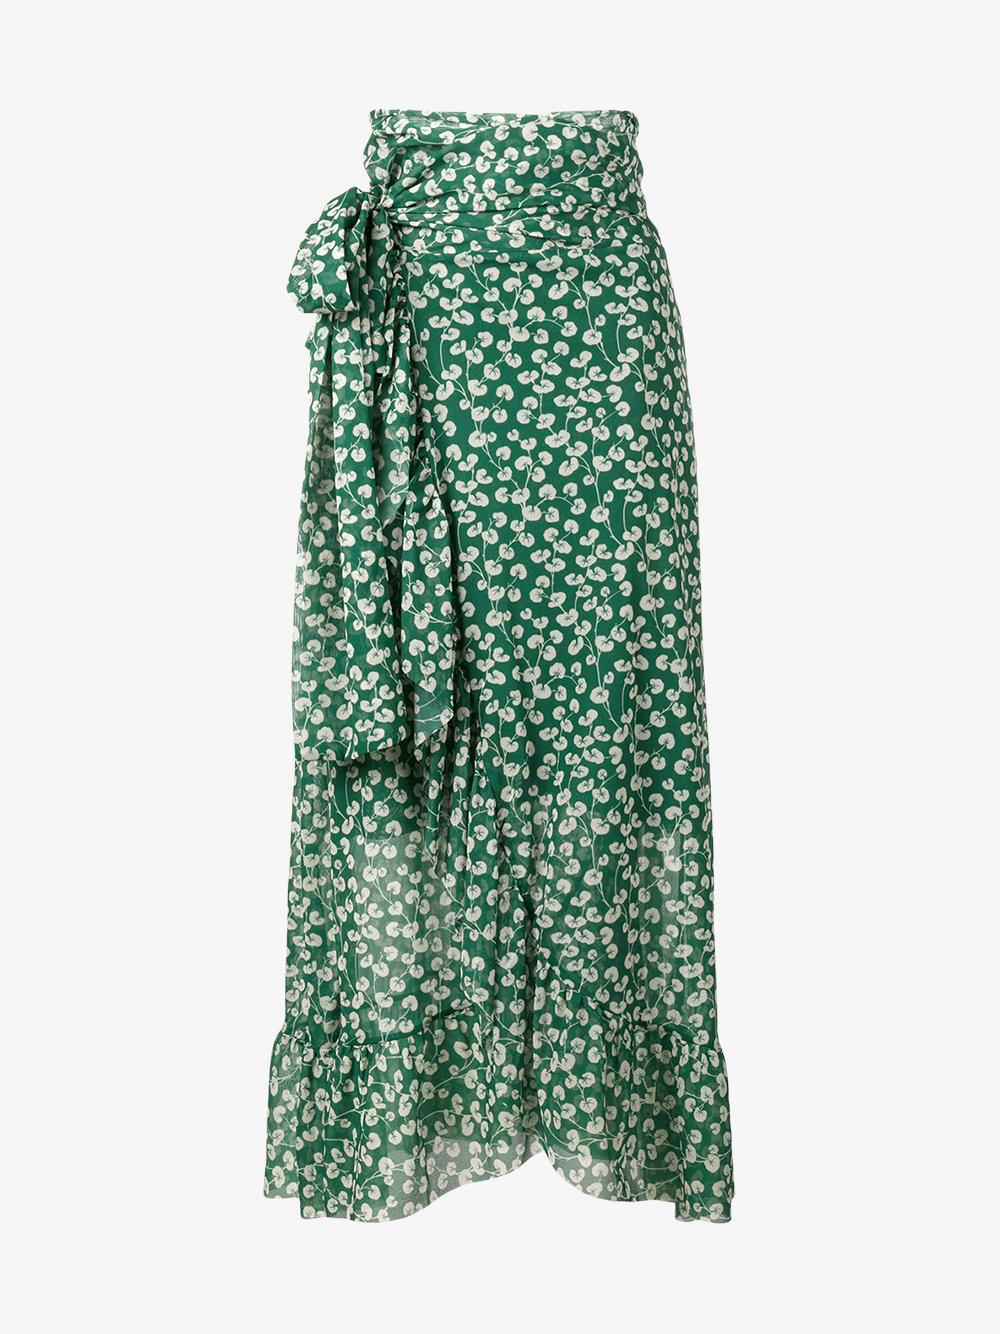 Ganni Synthetic Capella Mesh Floral Print Skirt in Green - Lyst